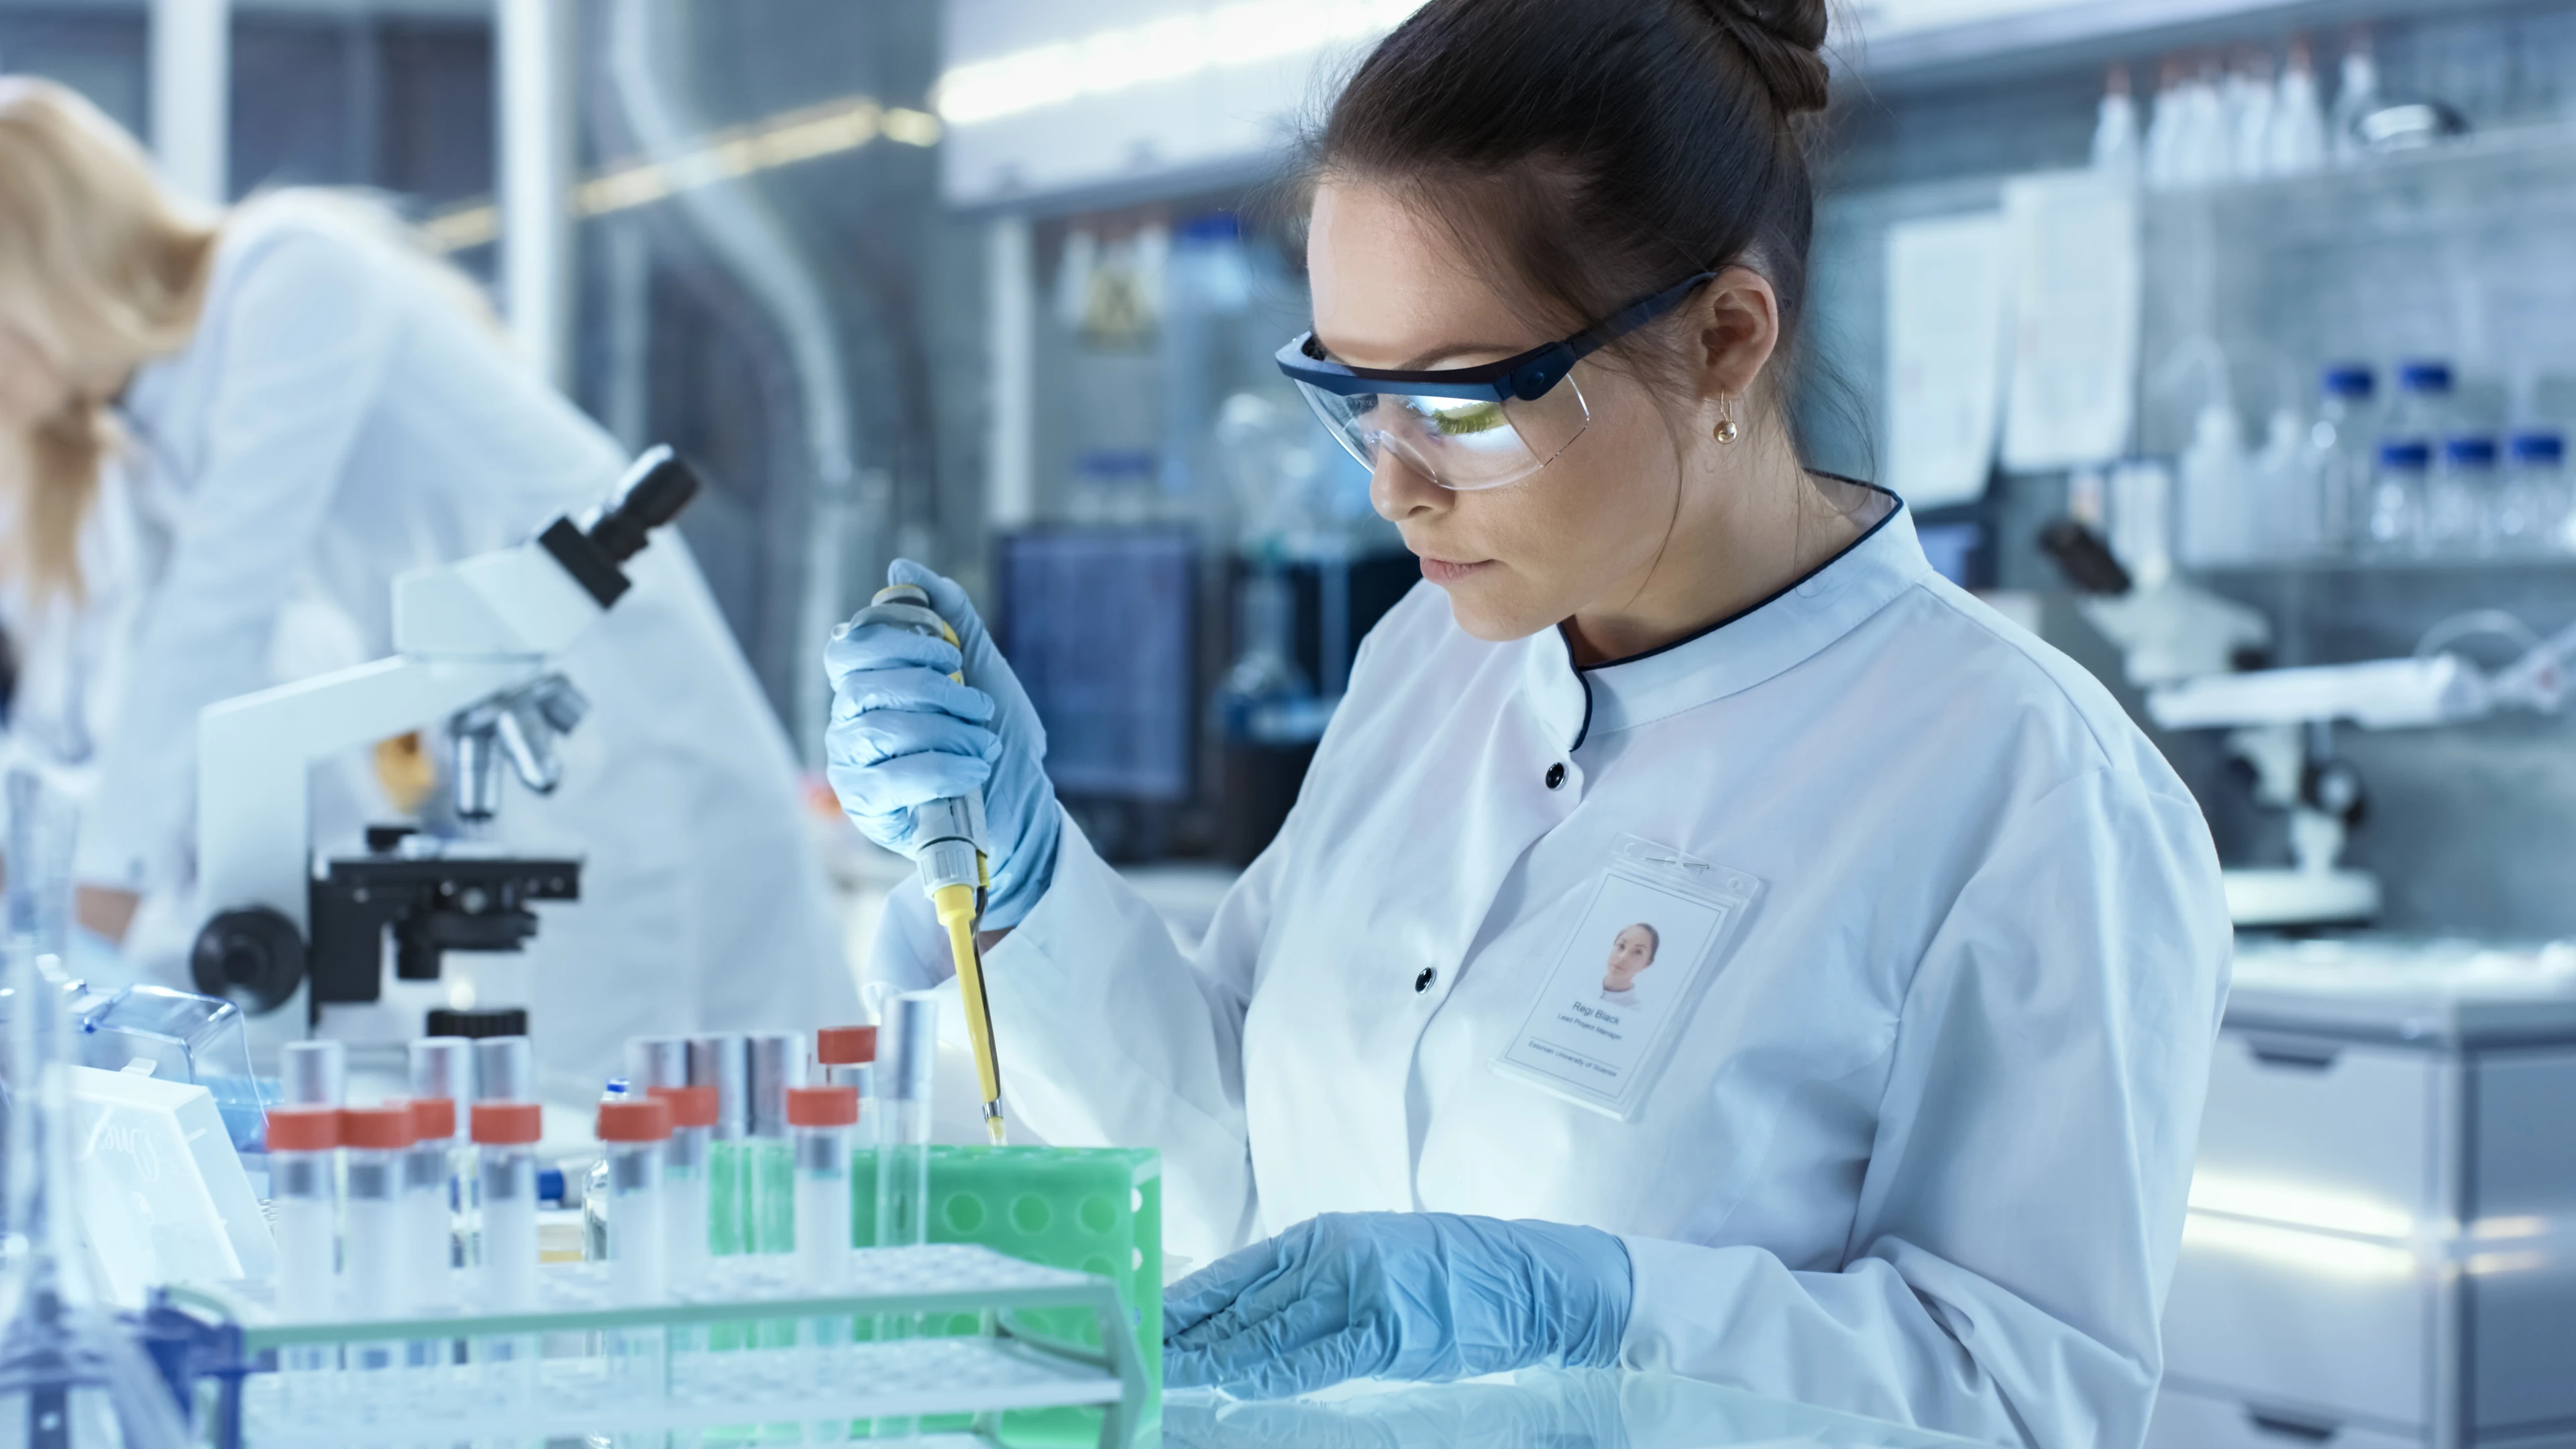 Female Research Scientist Uses Micropipette Filling Test Tubes in a Big Modern Laboratory.